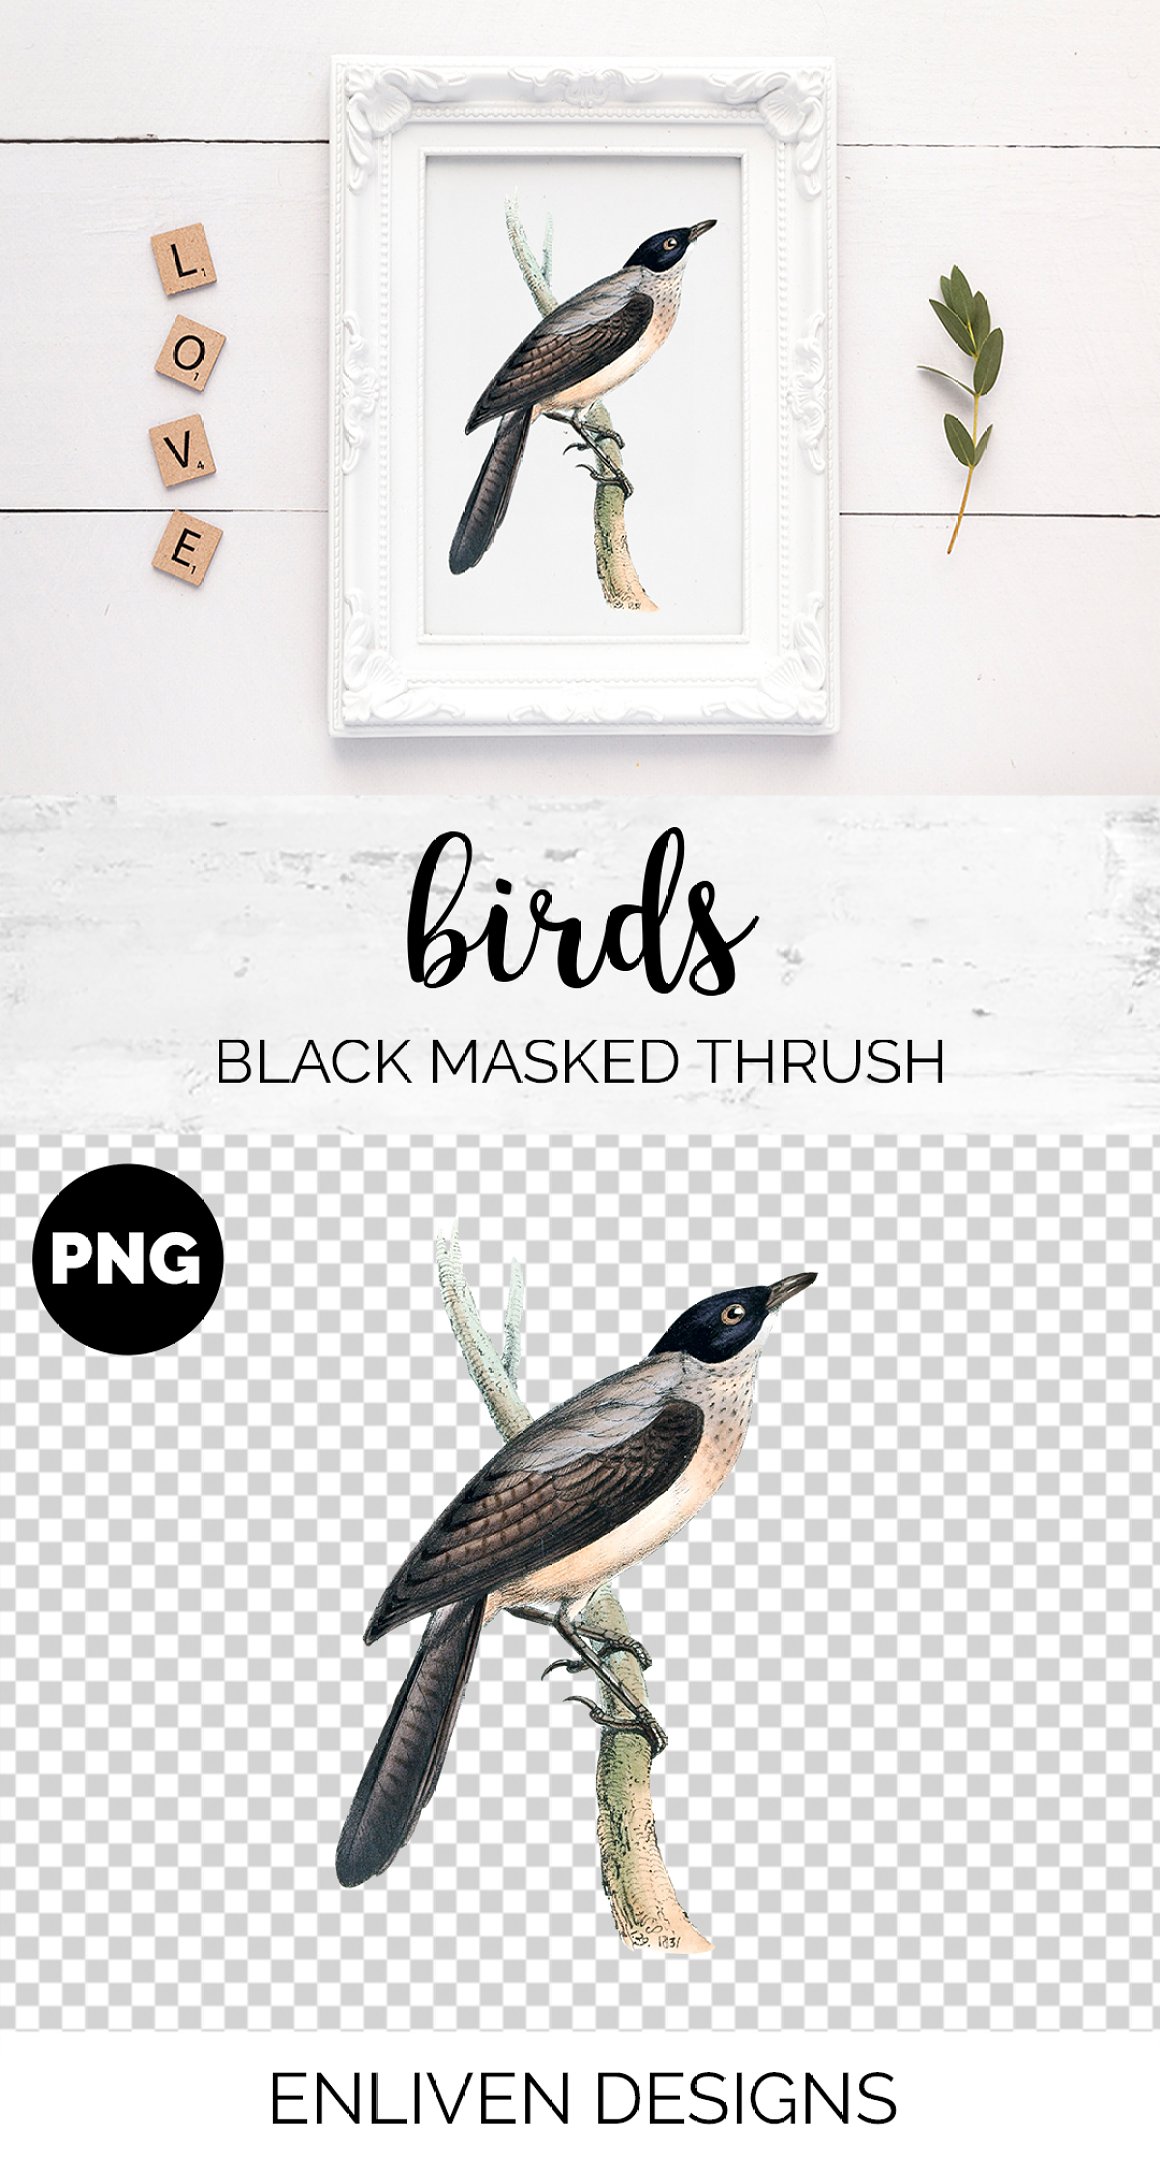 Preview of a picture with a picture of a bird and a branch.